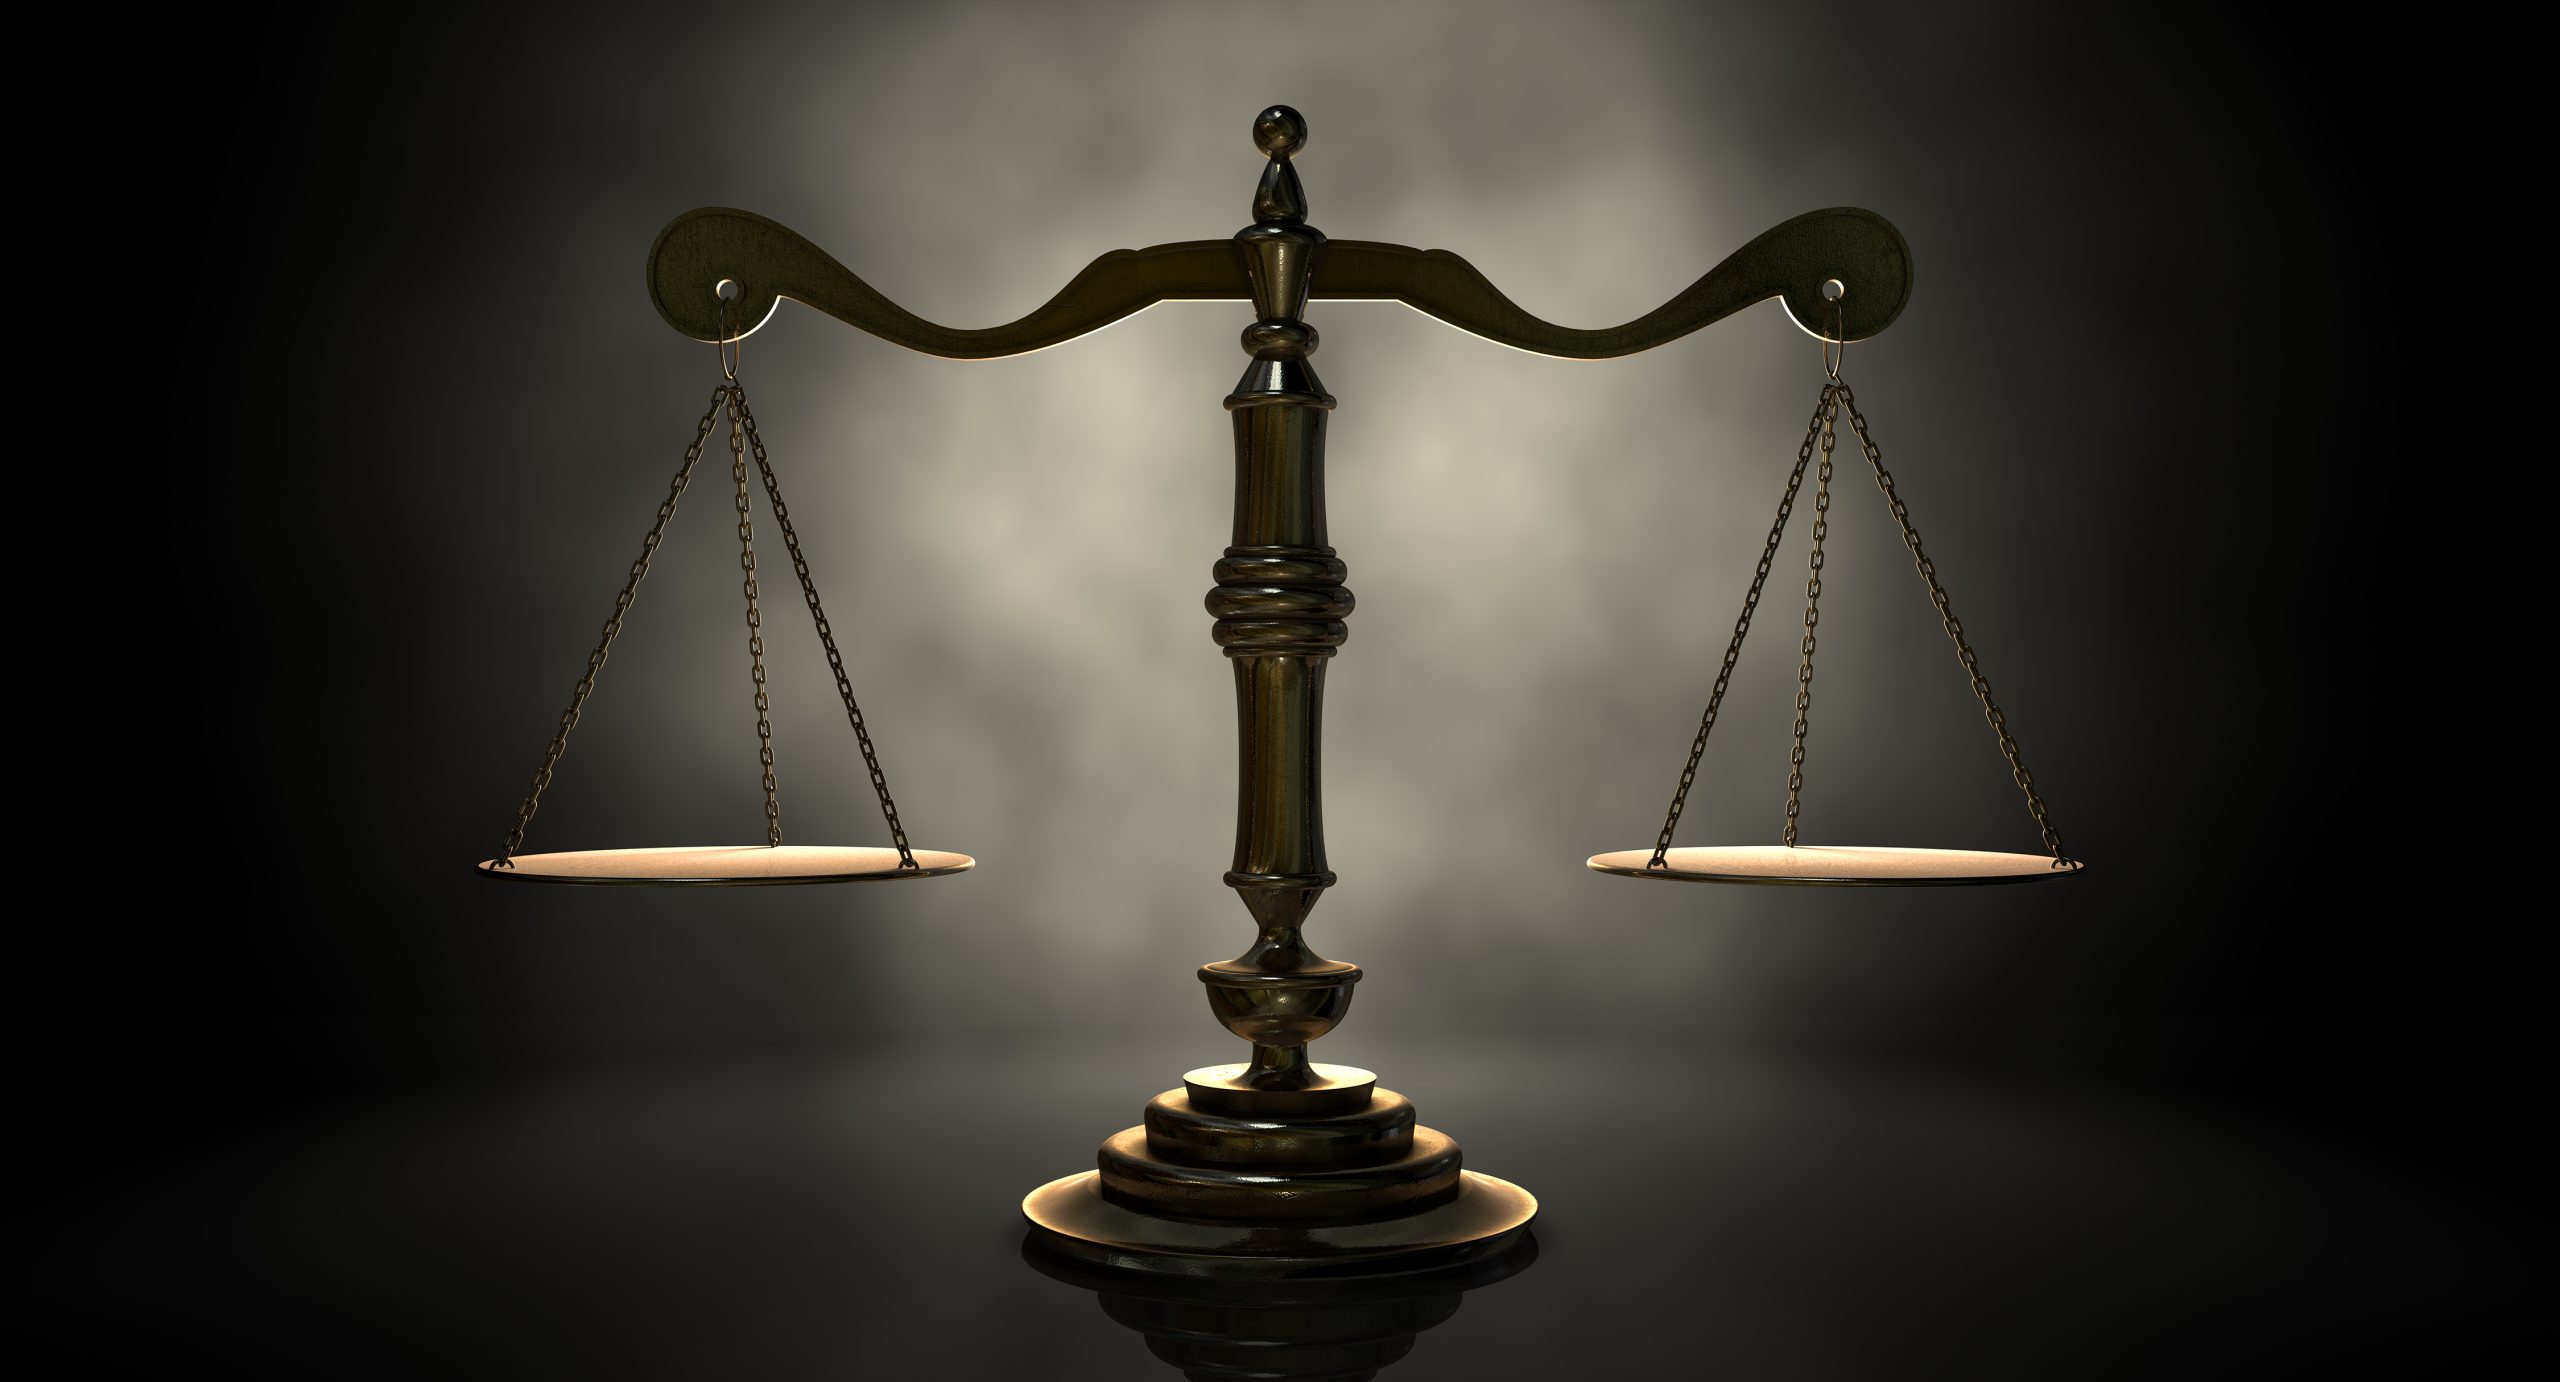 https://depositphotos.com/40621857/stock-photo-scales-of-justice.html